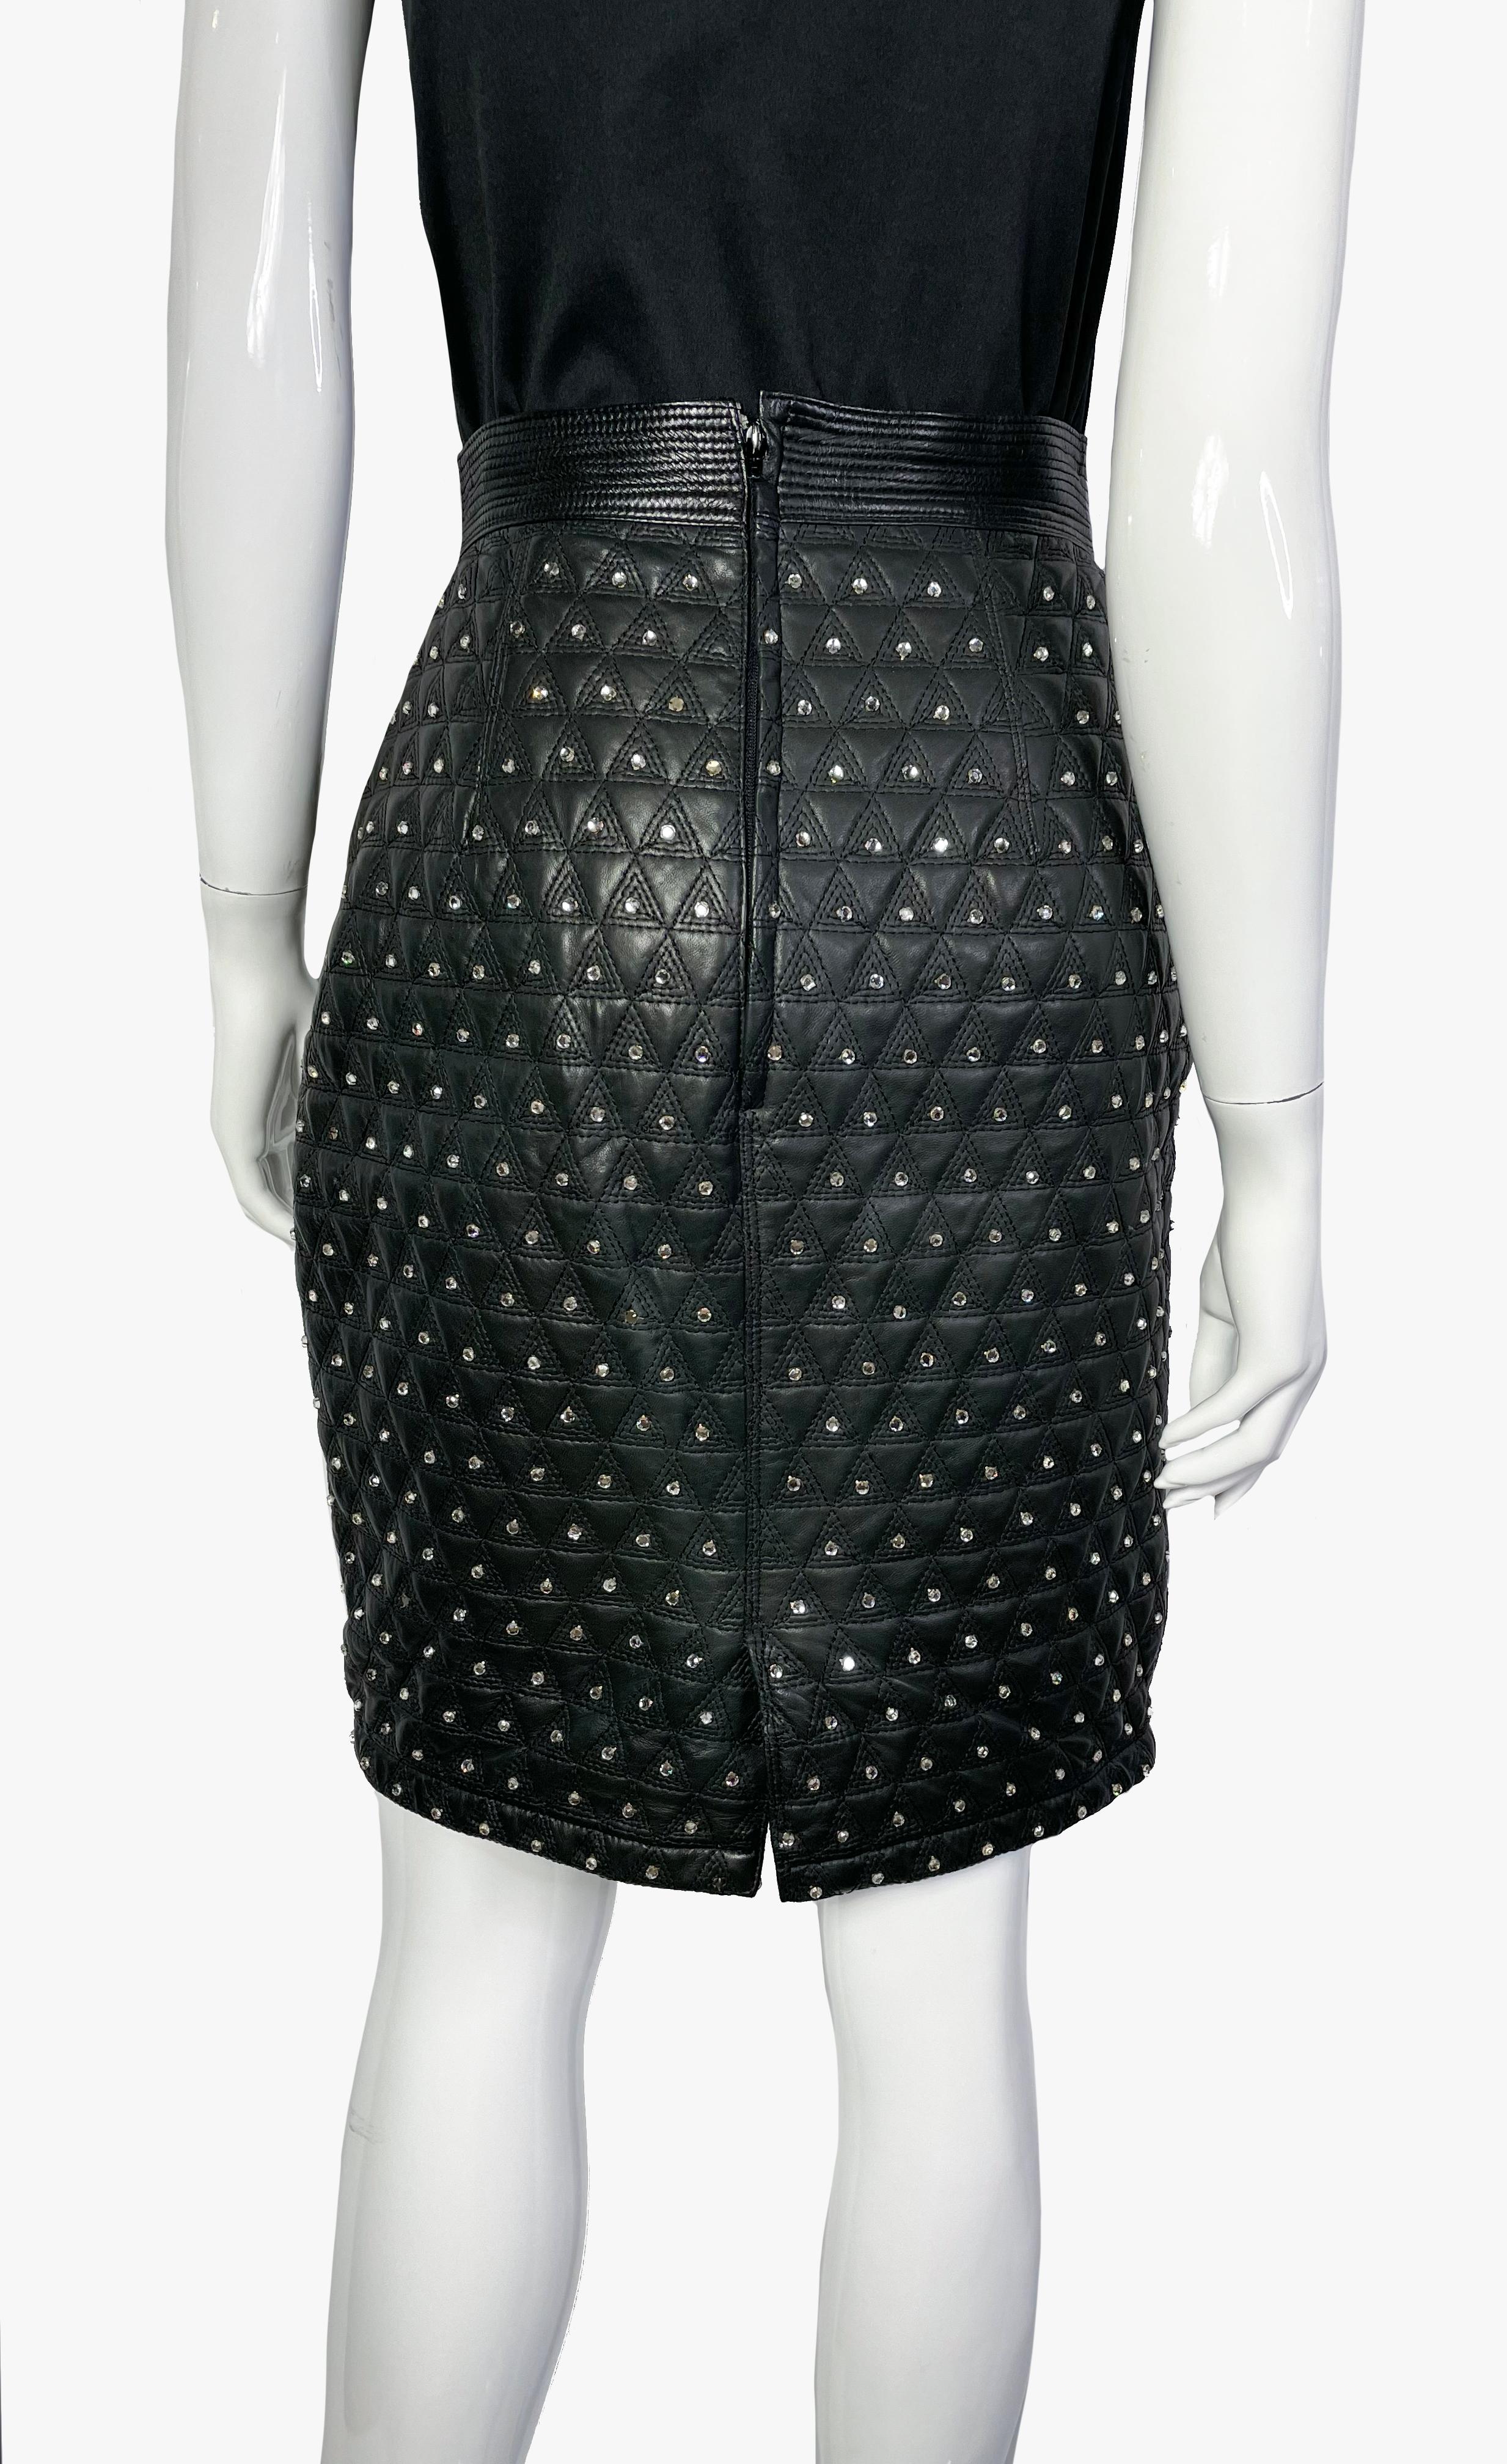 Gianni Versace vintage quilted leather skirt with rhinestones

Knee-length, fully lined, back zip fastening

Size – IT 42 / S-M

Waist –  55 cm
Length – 68 cm
Hips – 92 cm

Condition – very good, missing one strand

Fabric – 100% leather, lining